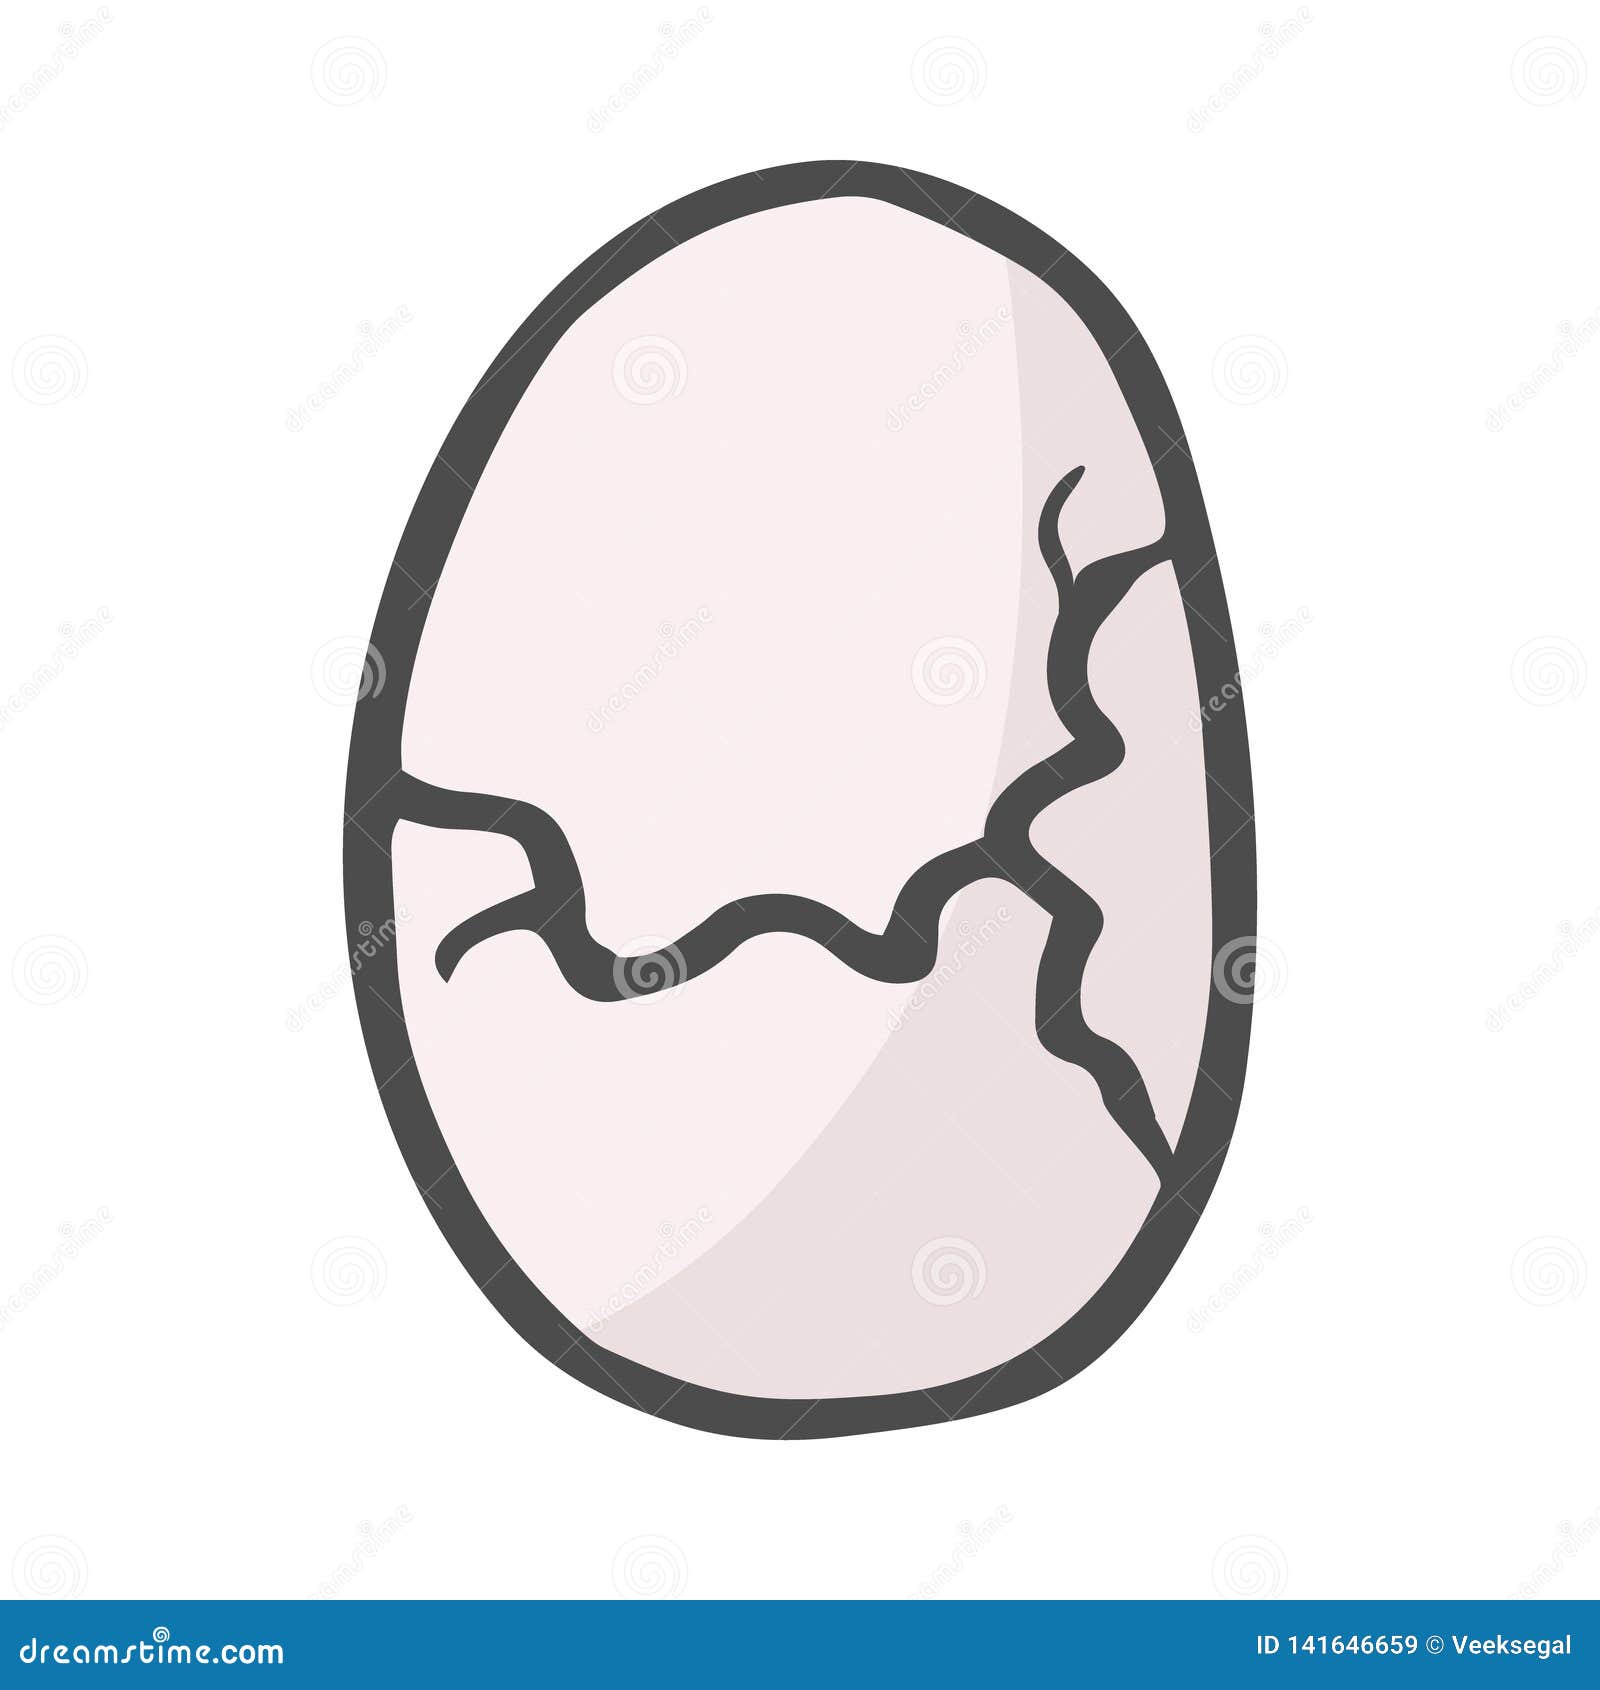 Color Freehand Drawn Cartoon Cracked Egg. Vector Illustration Isolated